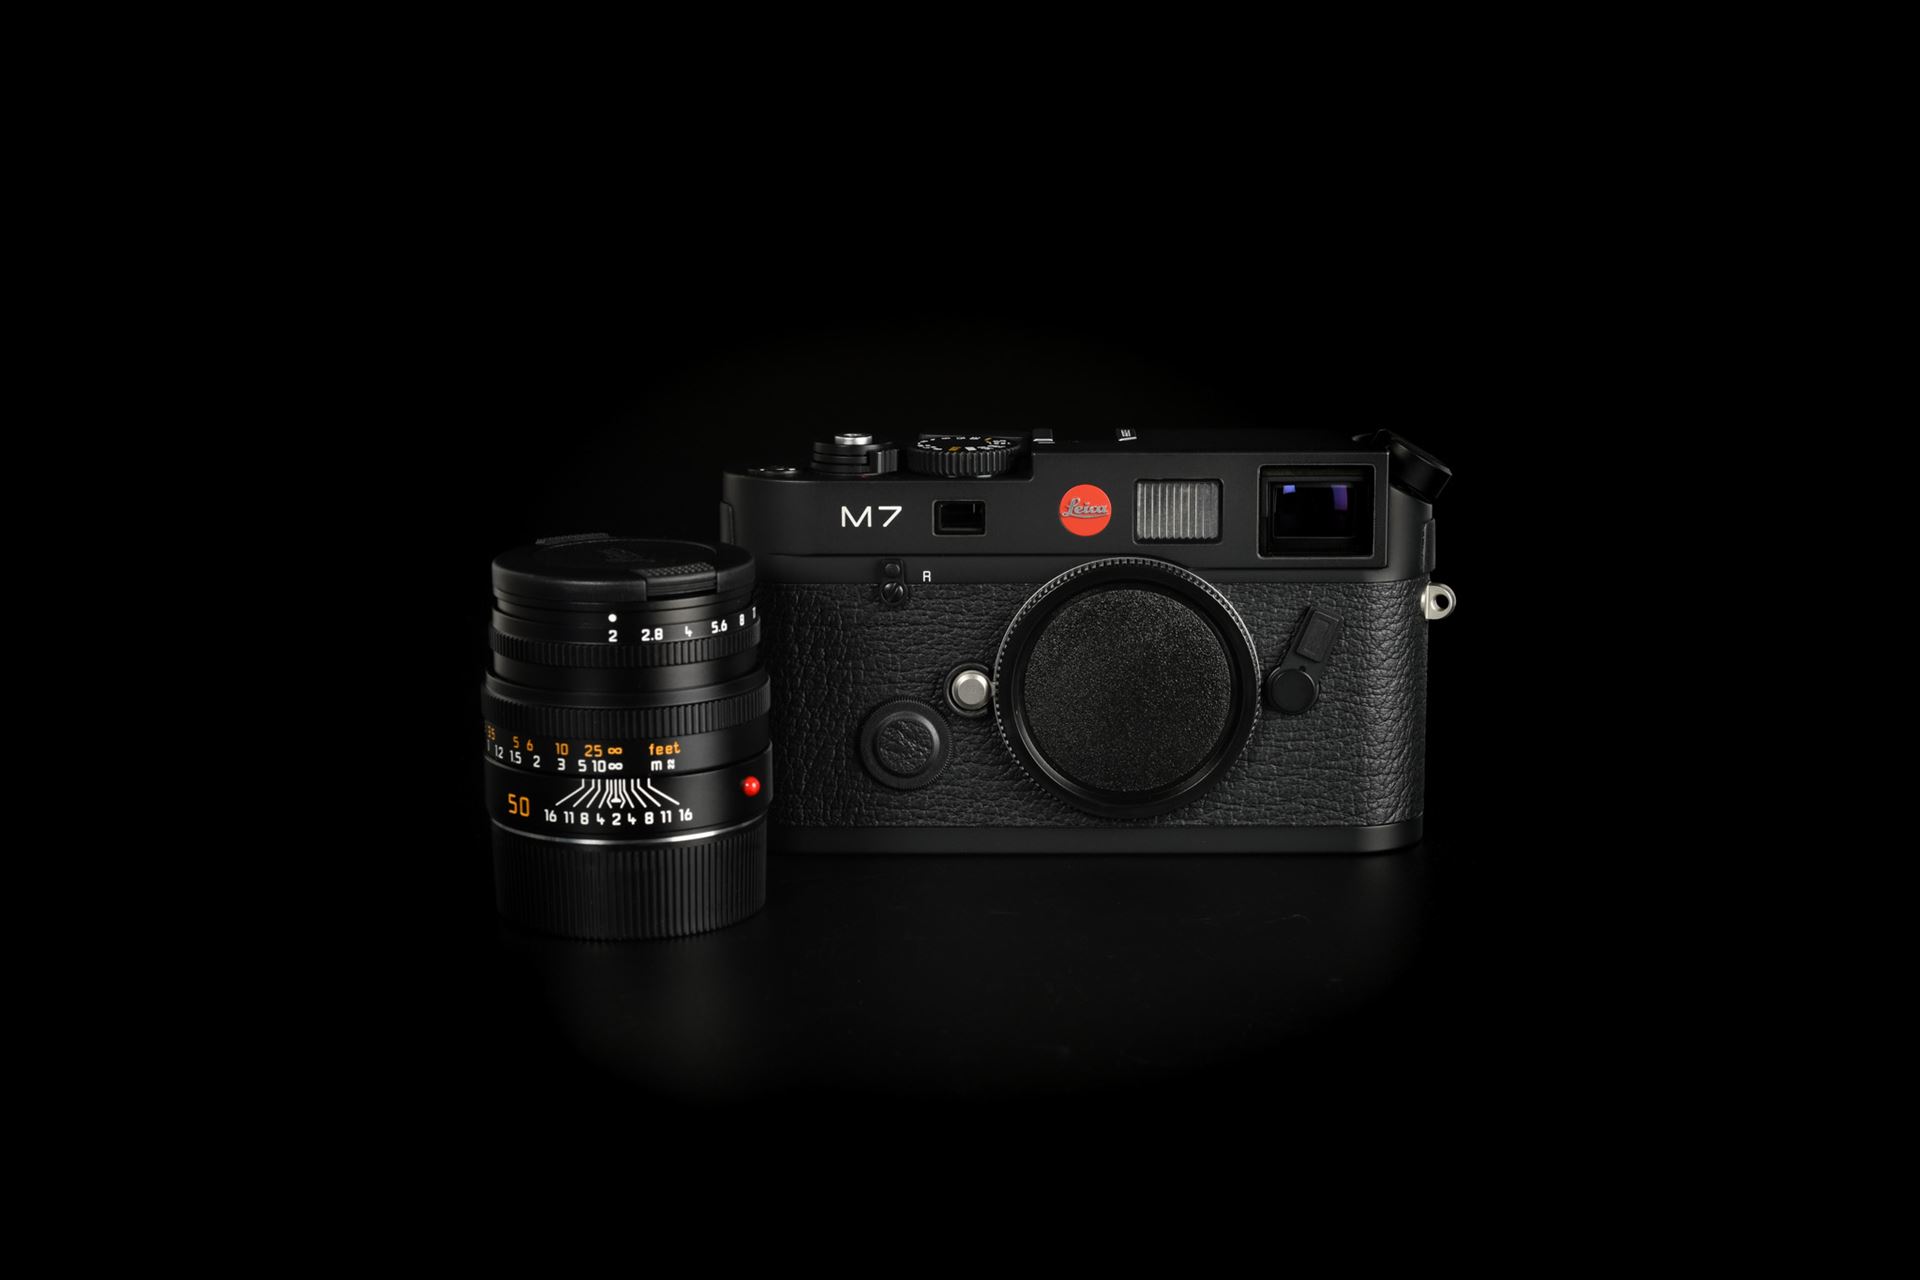 Picture of Leica M7 0.72 Black With Summicron-M 50mm f/2 Pre-ASPH Kit Set